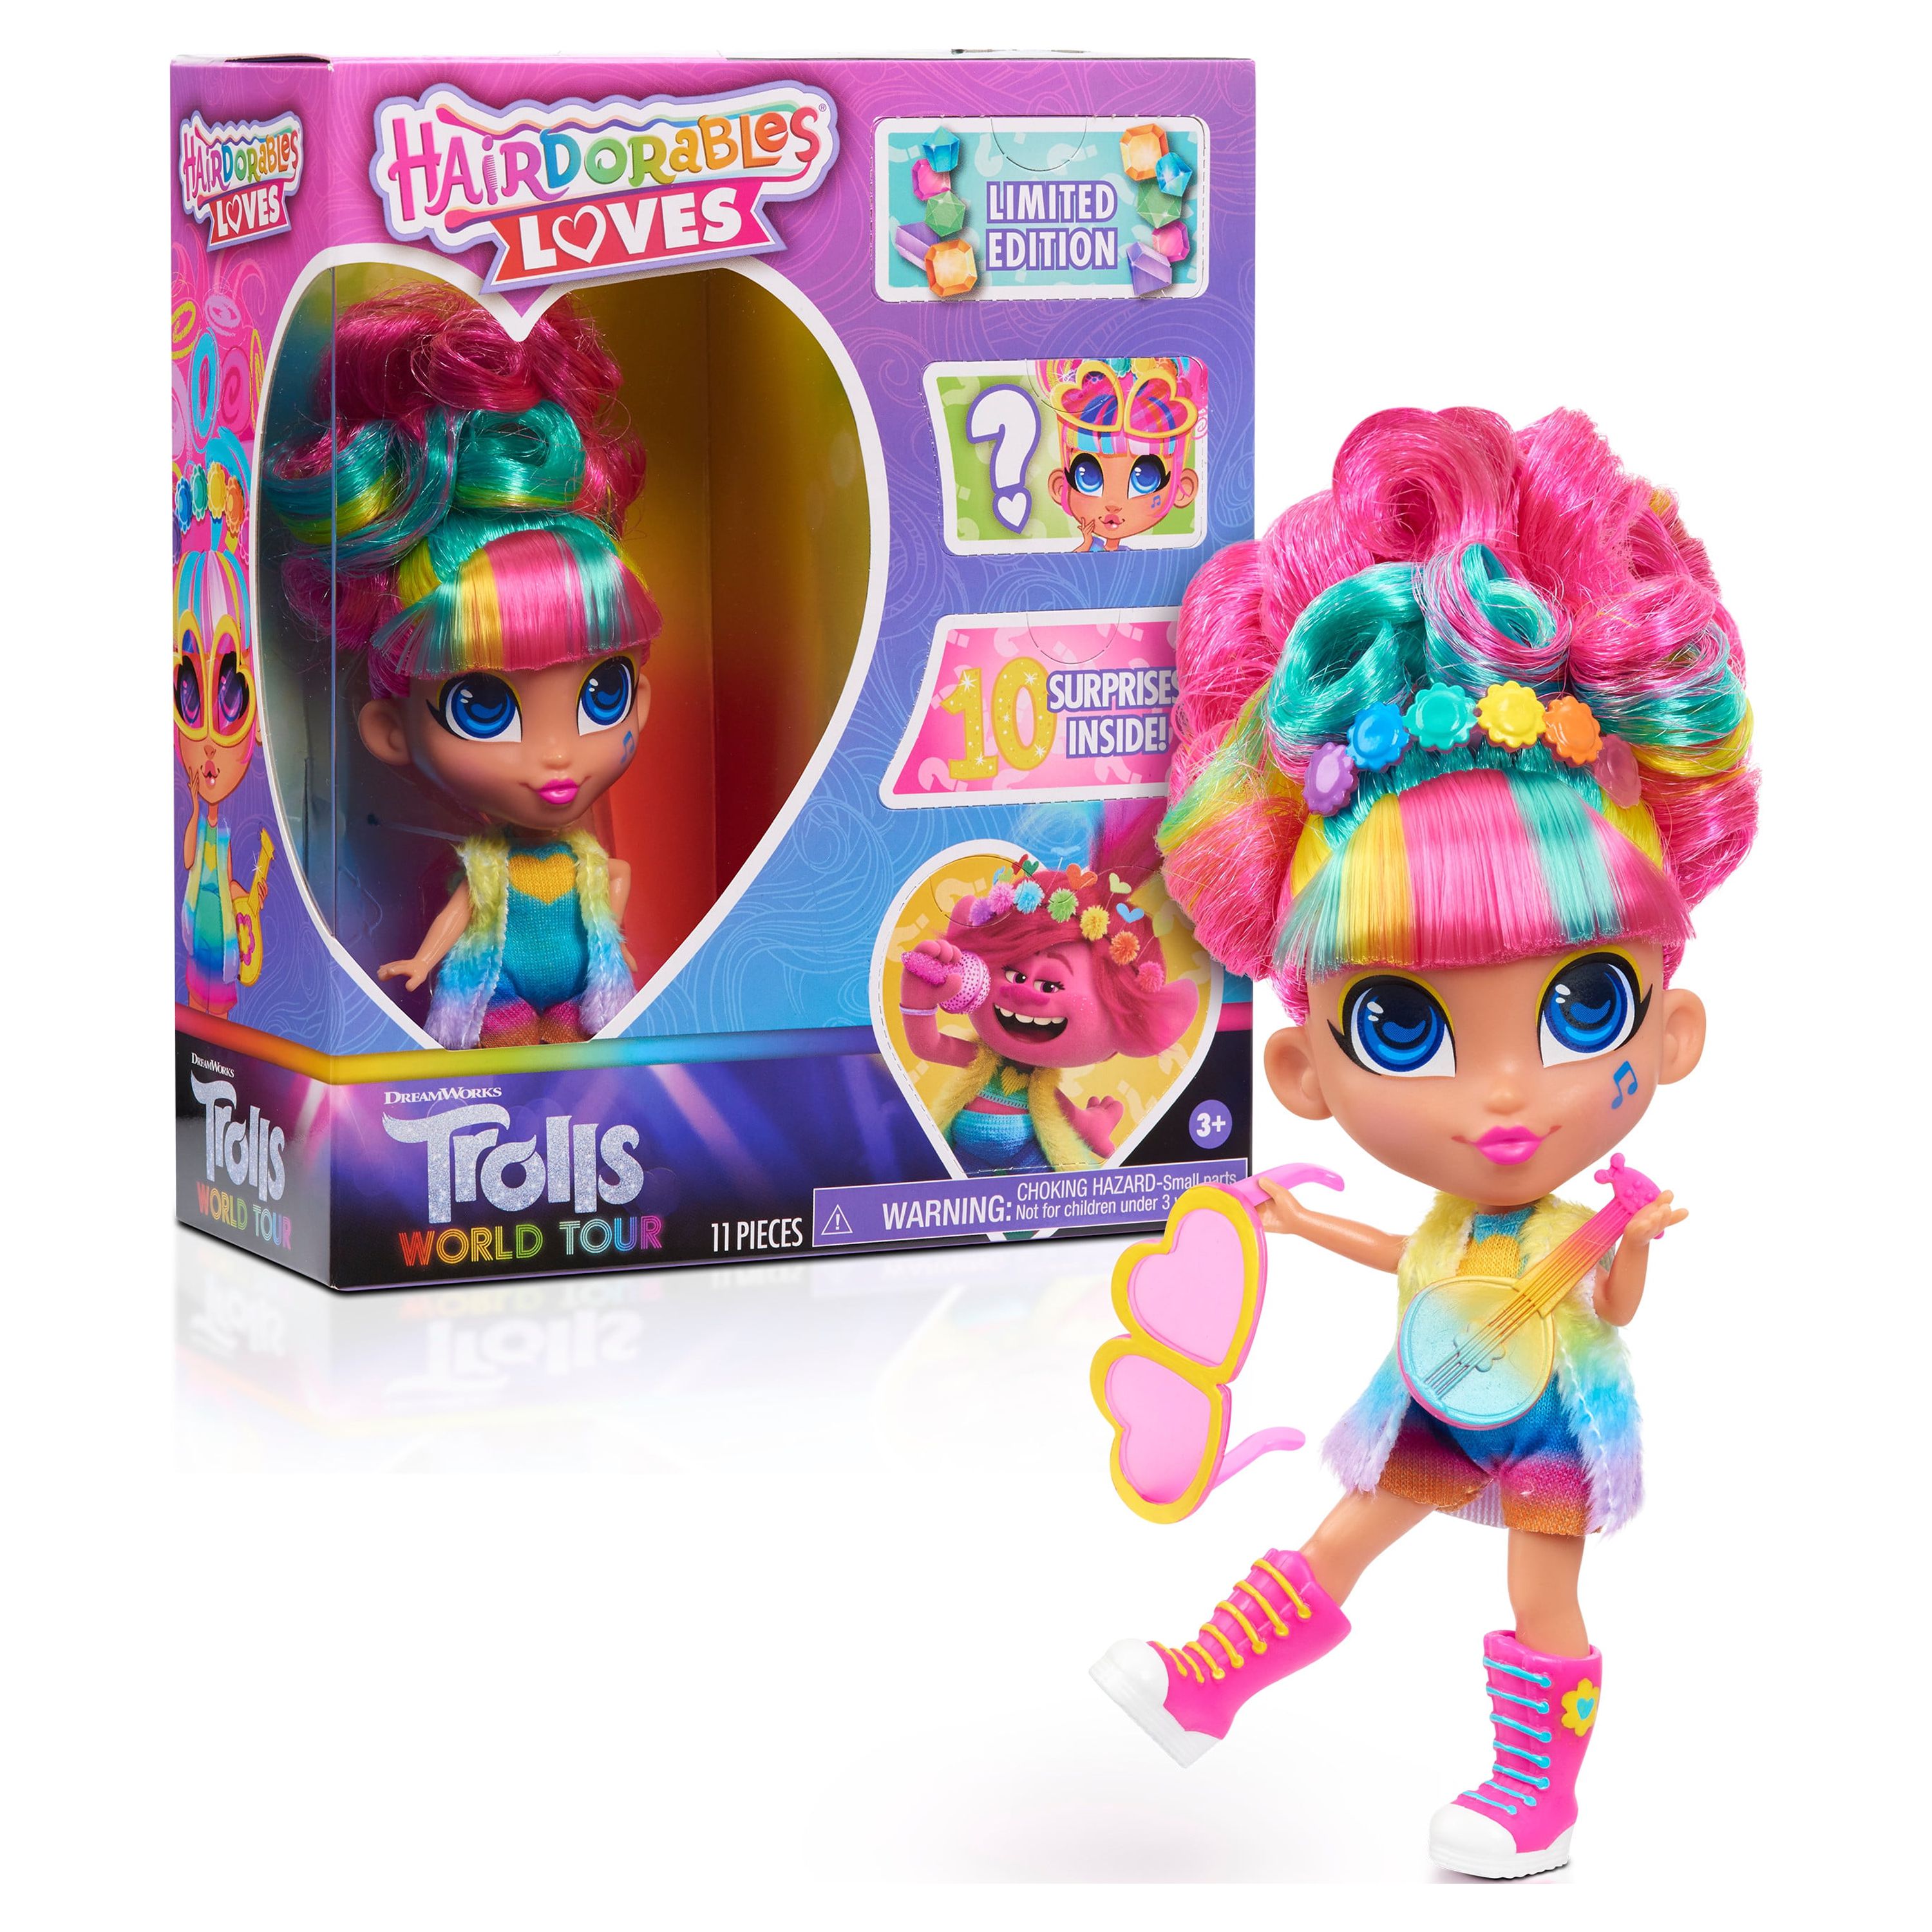 Hairdorables Loves Trolls World Tour,  Kids Toys for Ages 3 Up, Gifts and Presents - image 1 of 3